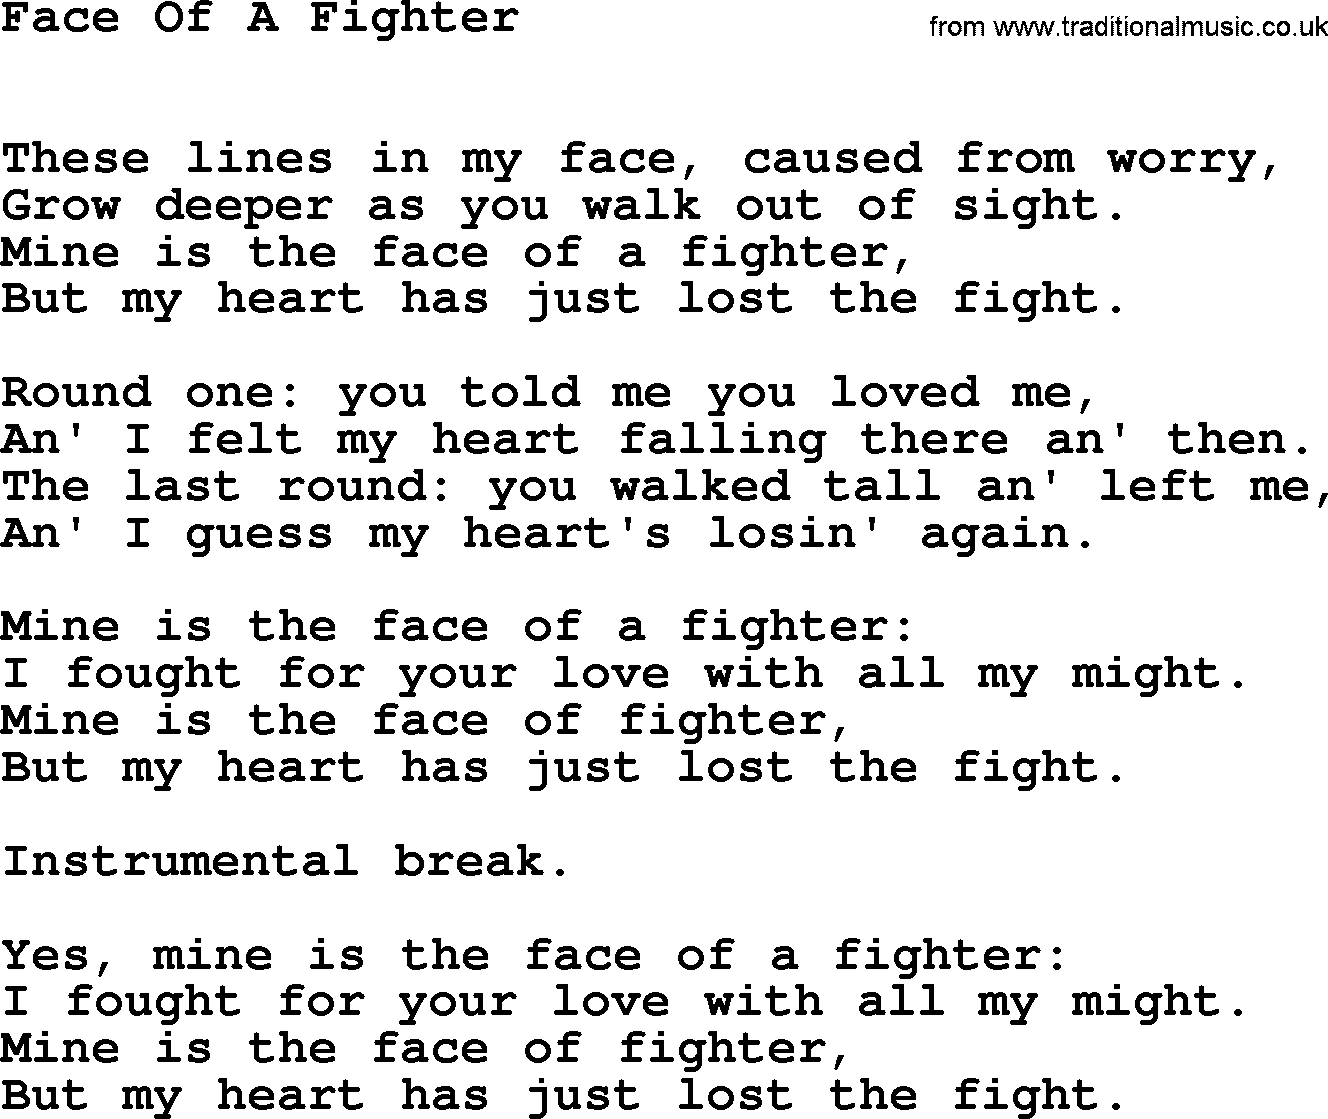 Willie Nelson song: Face Of A Fighter lyrics